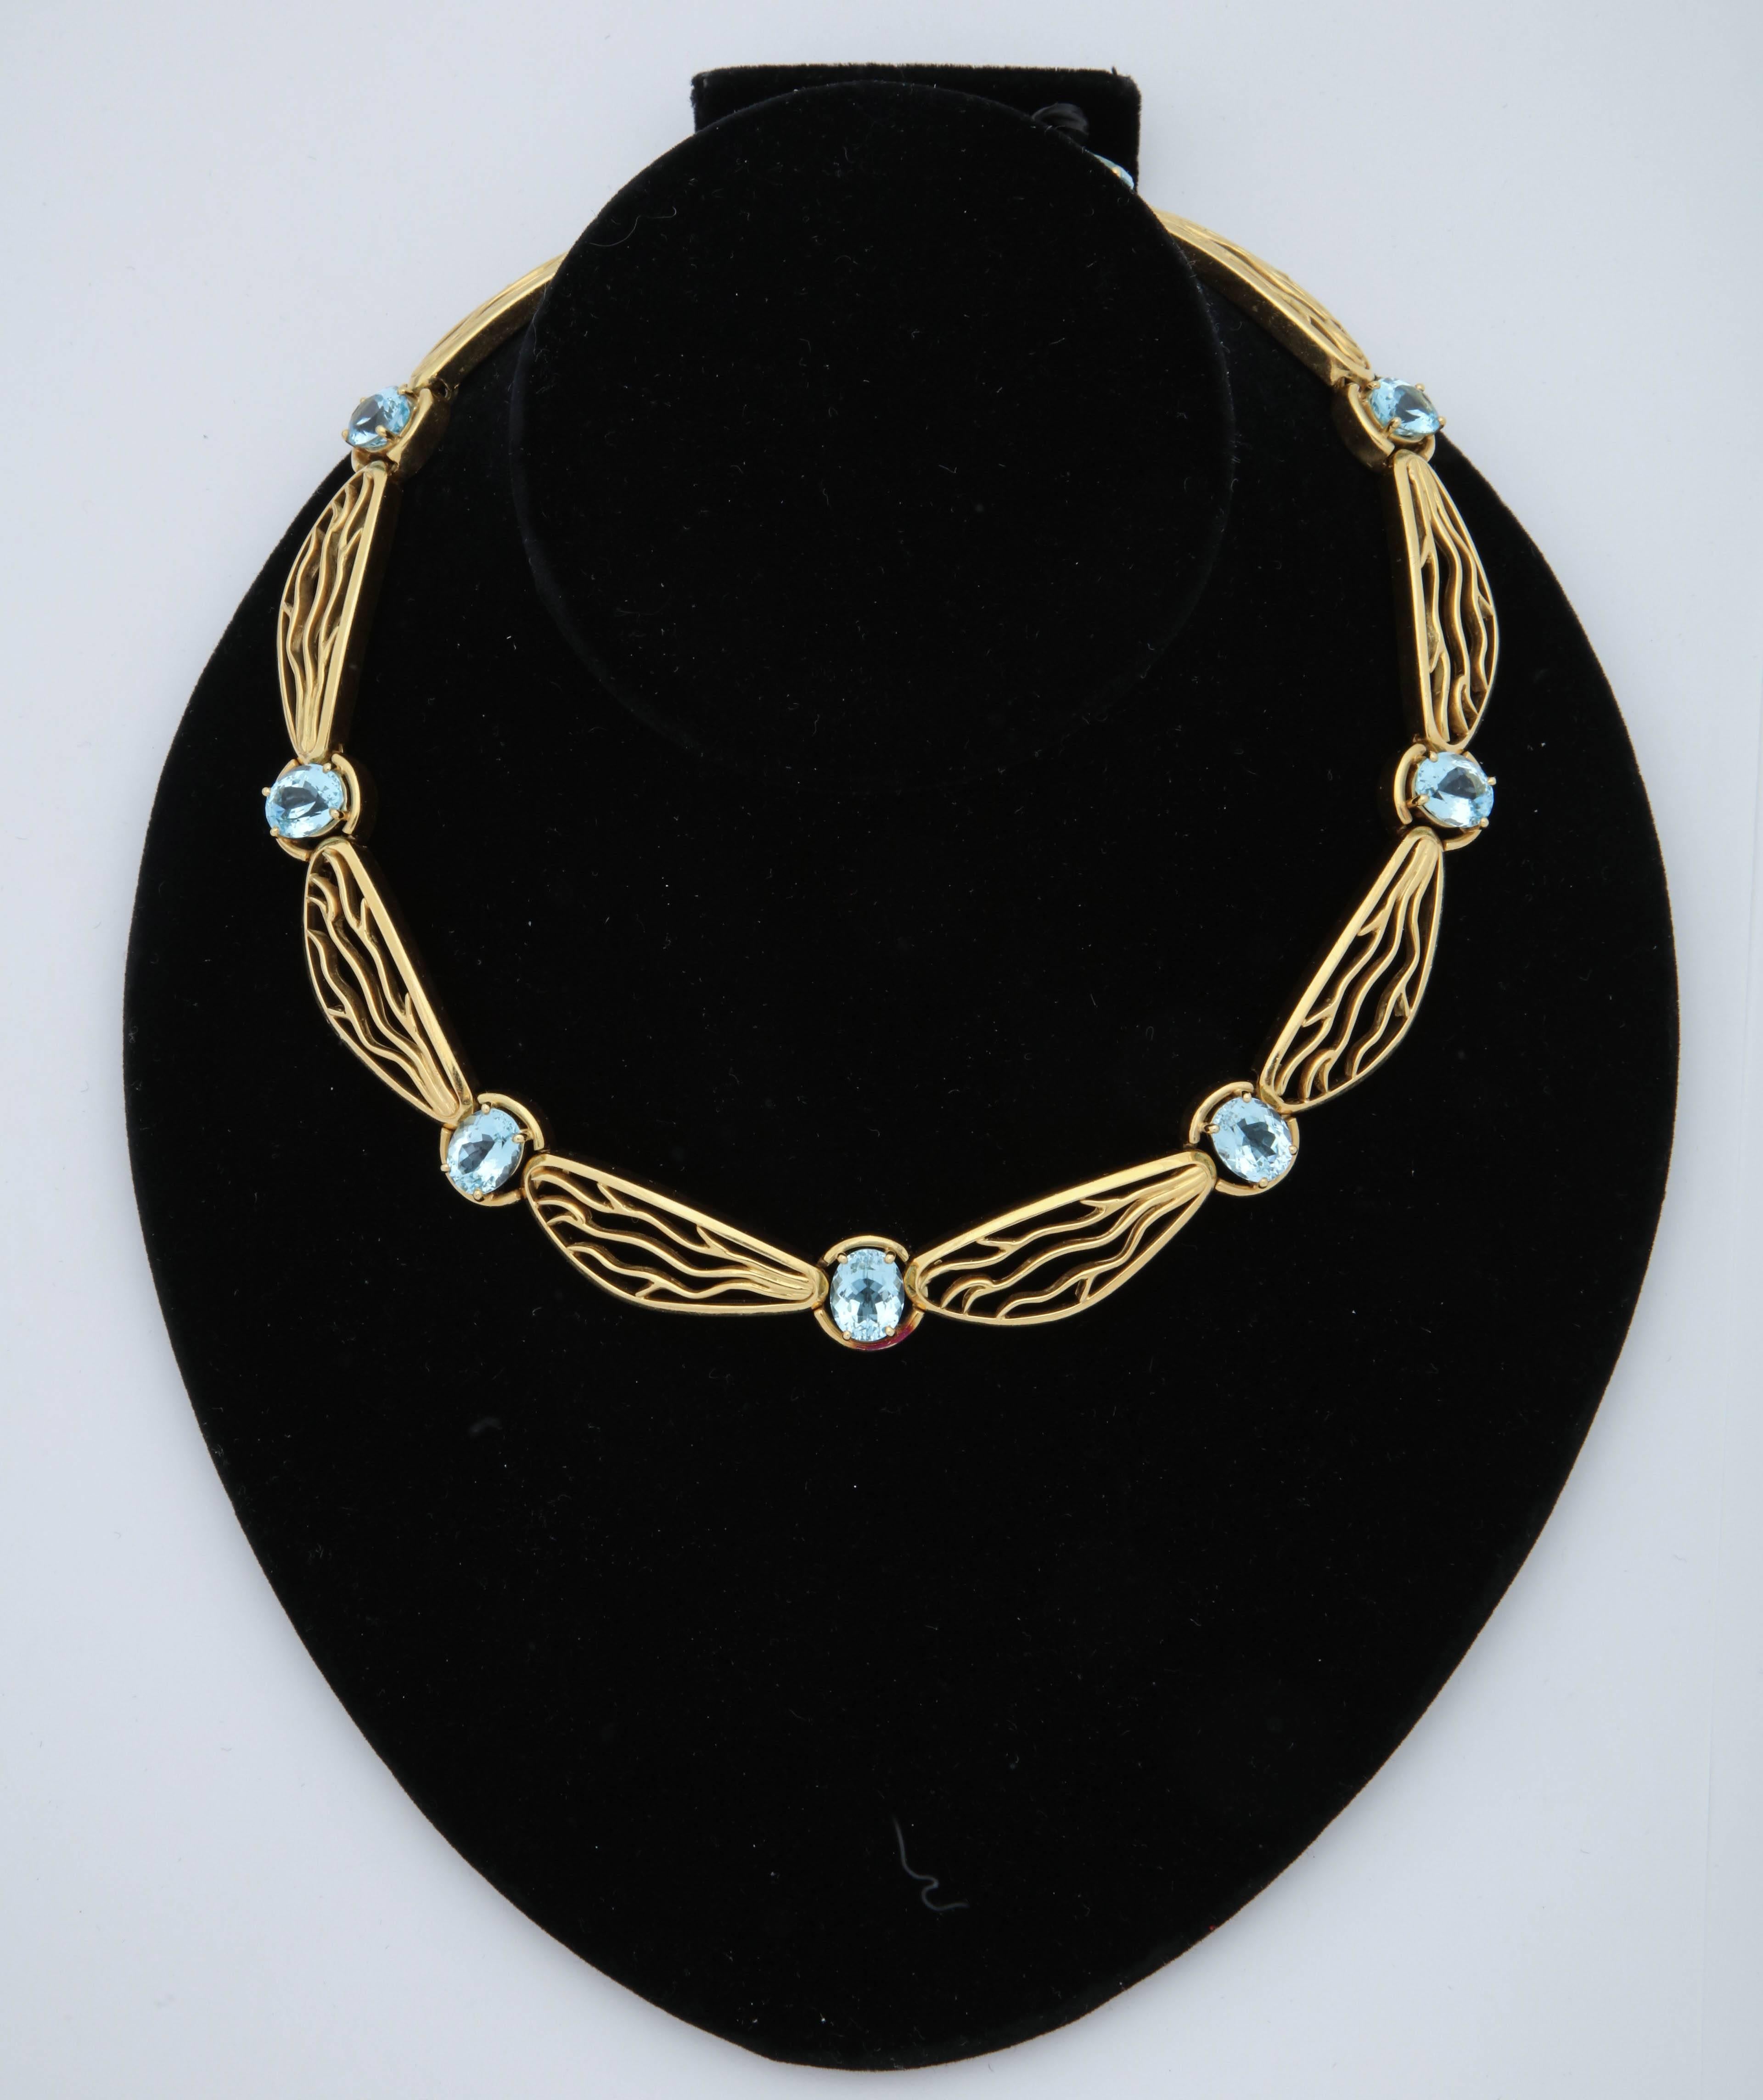 One Ladies Very Interesting and Unusual Heavy 18kt Yellow Gold Necklace In which The Gold Craftmanship Is Emulating DragonFly Wings Thruout The Design Of the Necklace.This Choker style Necklace Is embellished With Nine Delicate Prong Set  Oval Cut